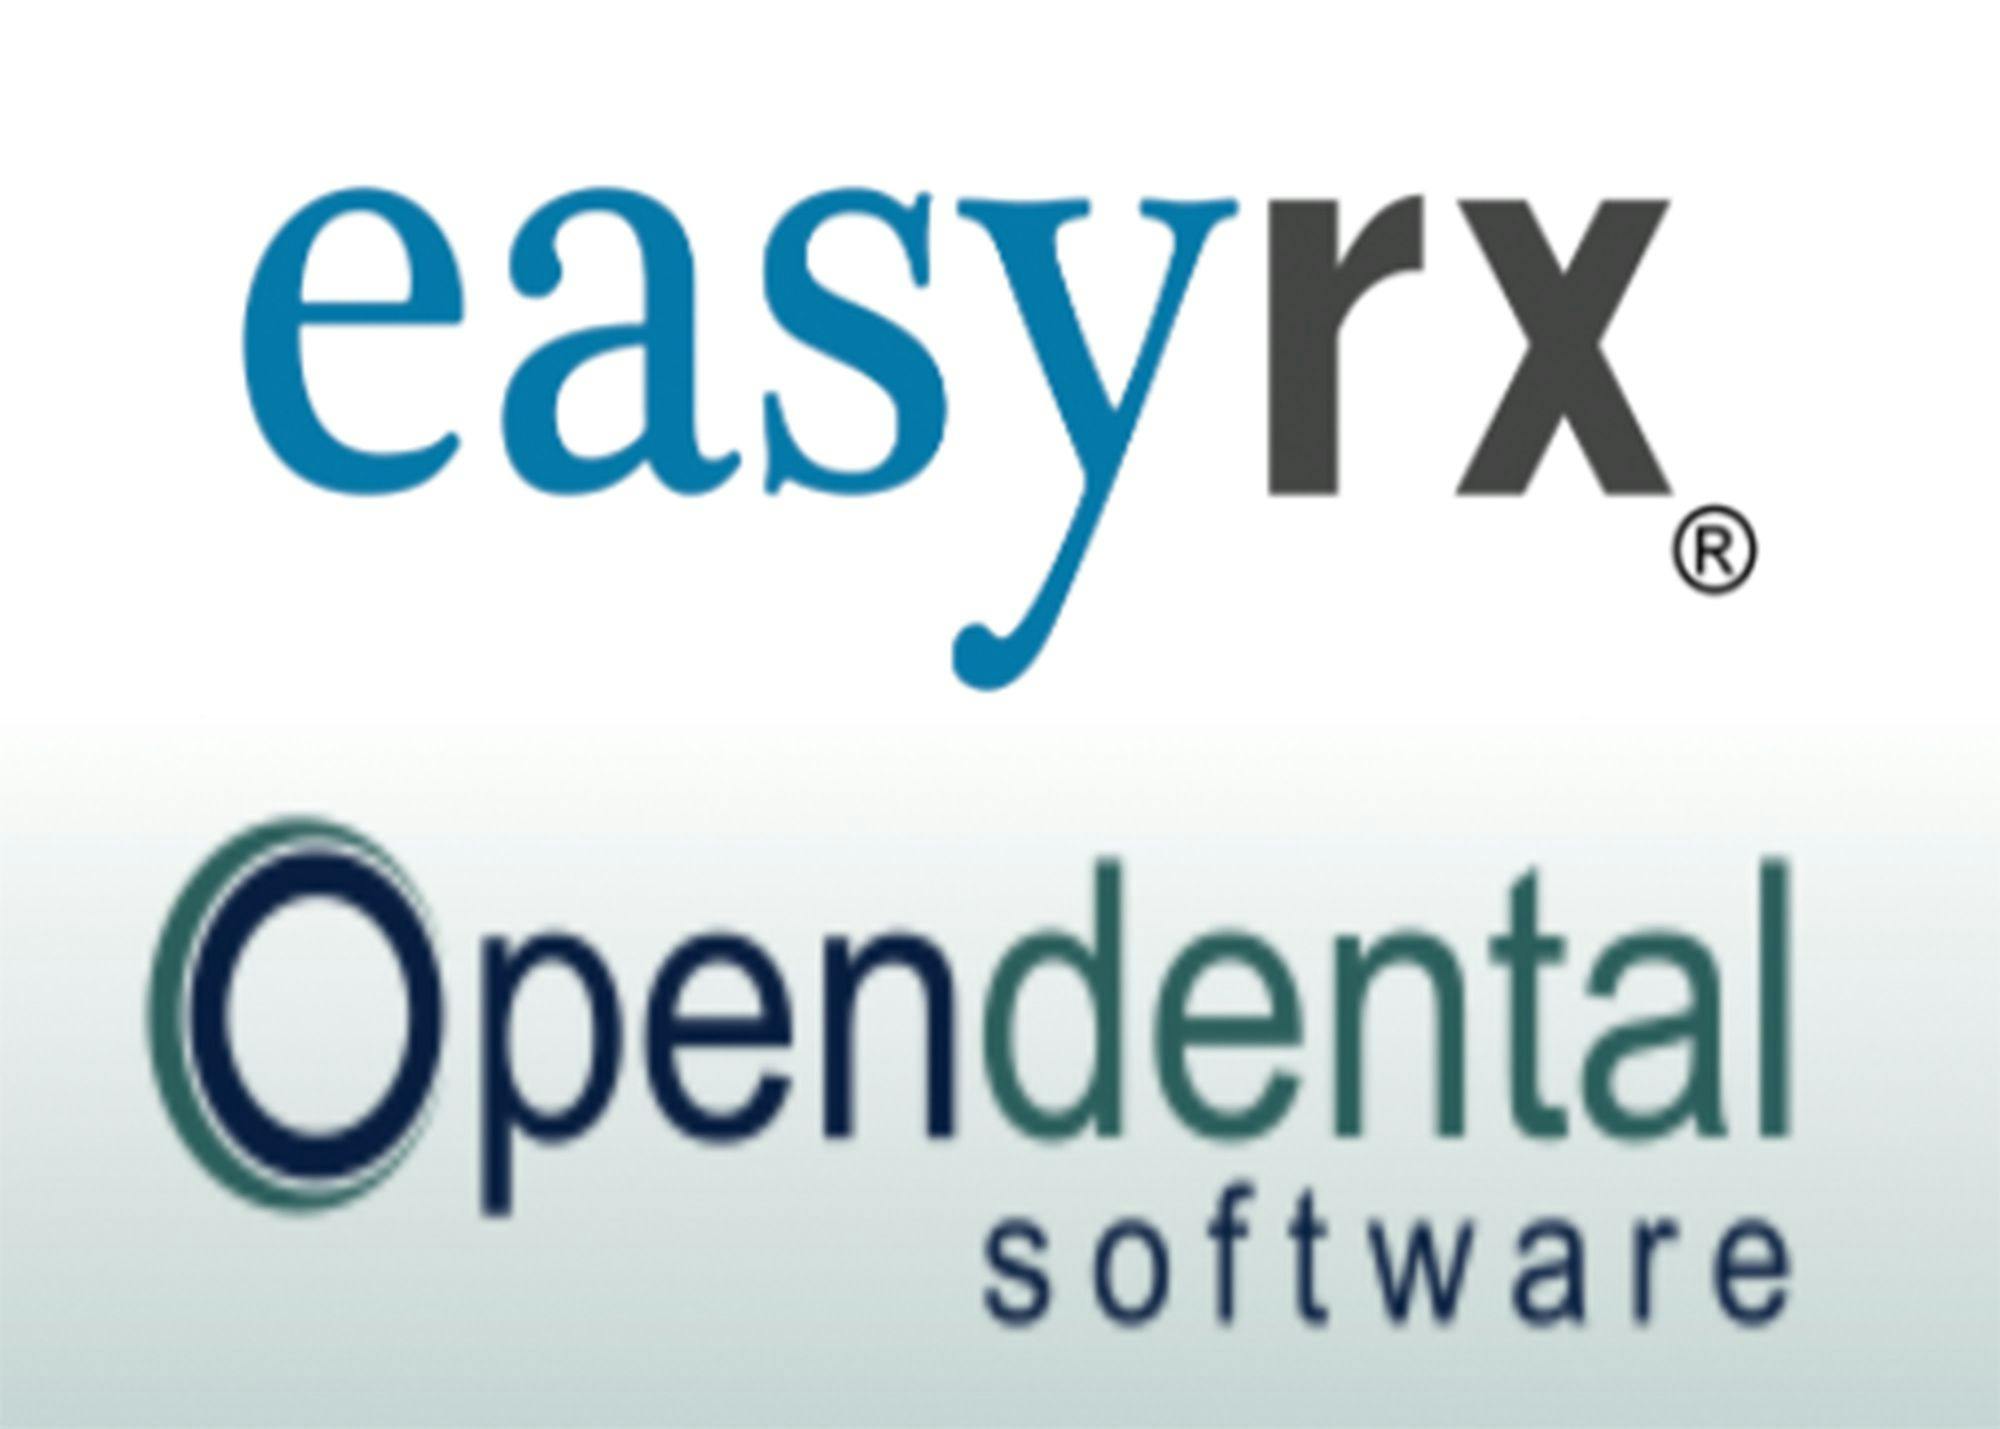 EasyRx Announces Integration with Open Dental